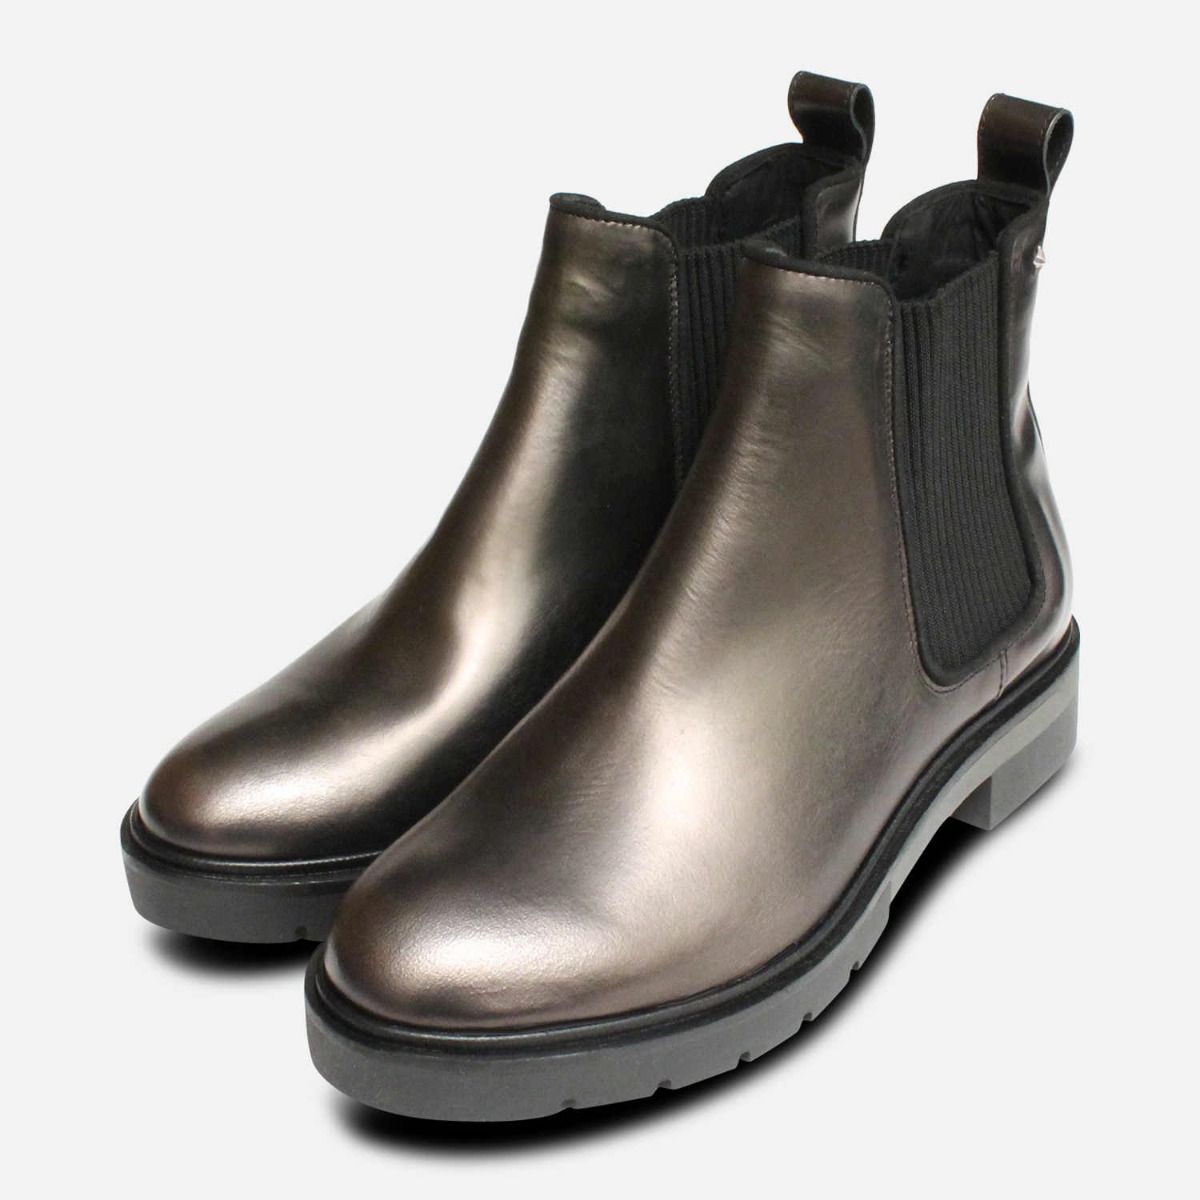 tommy hilfiger ladies ankle boots